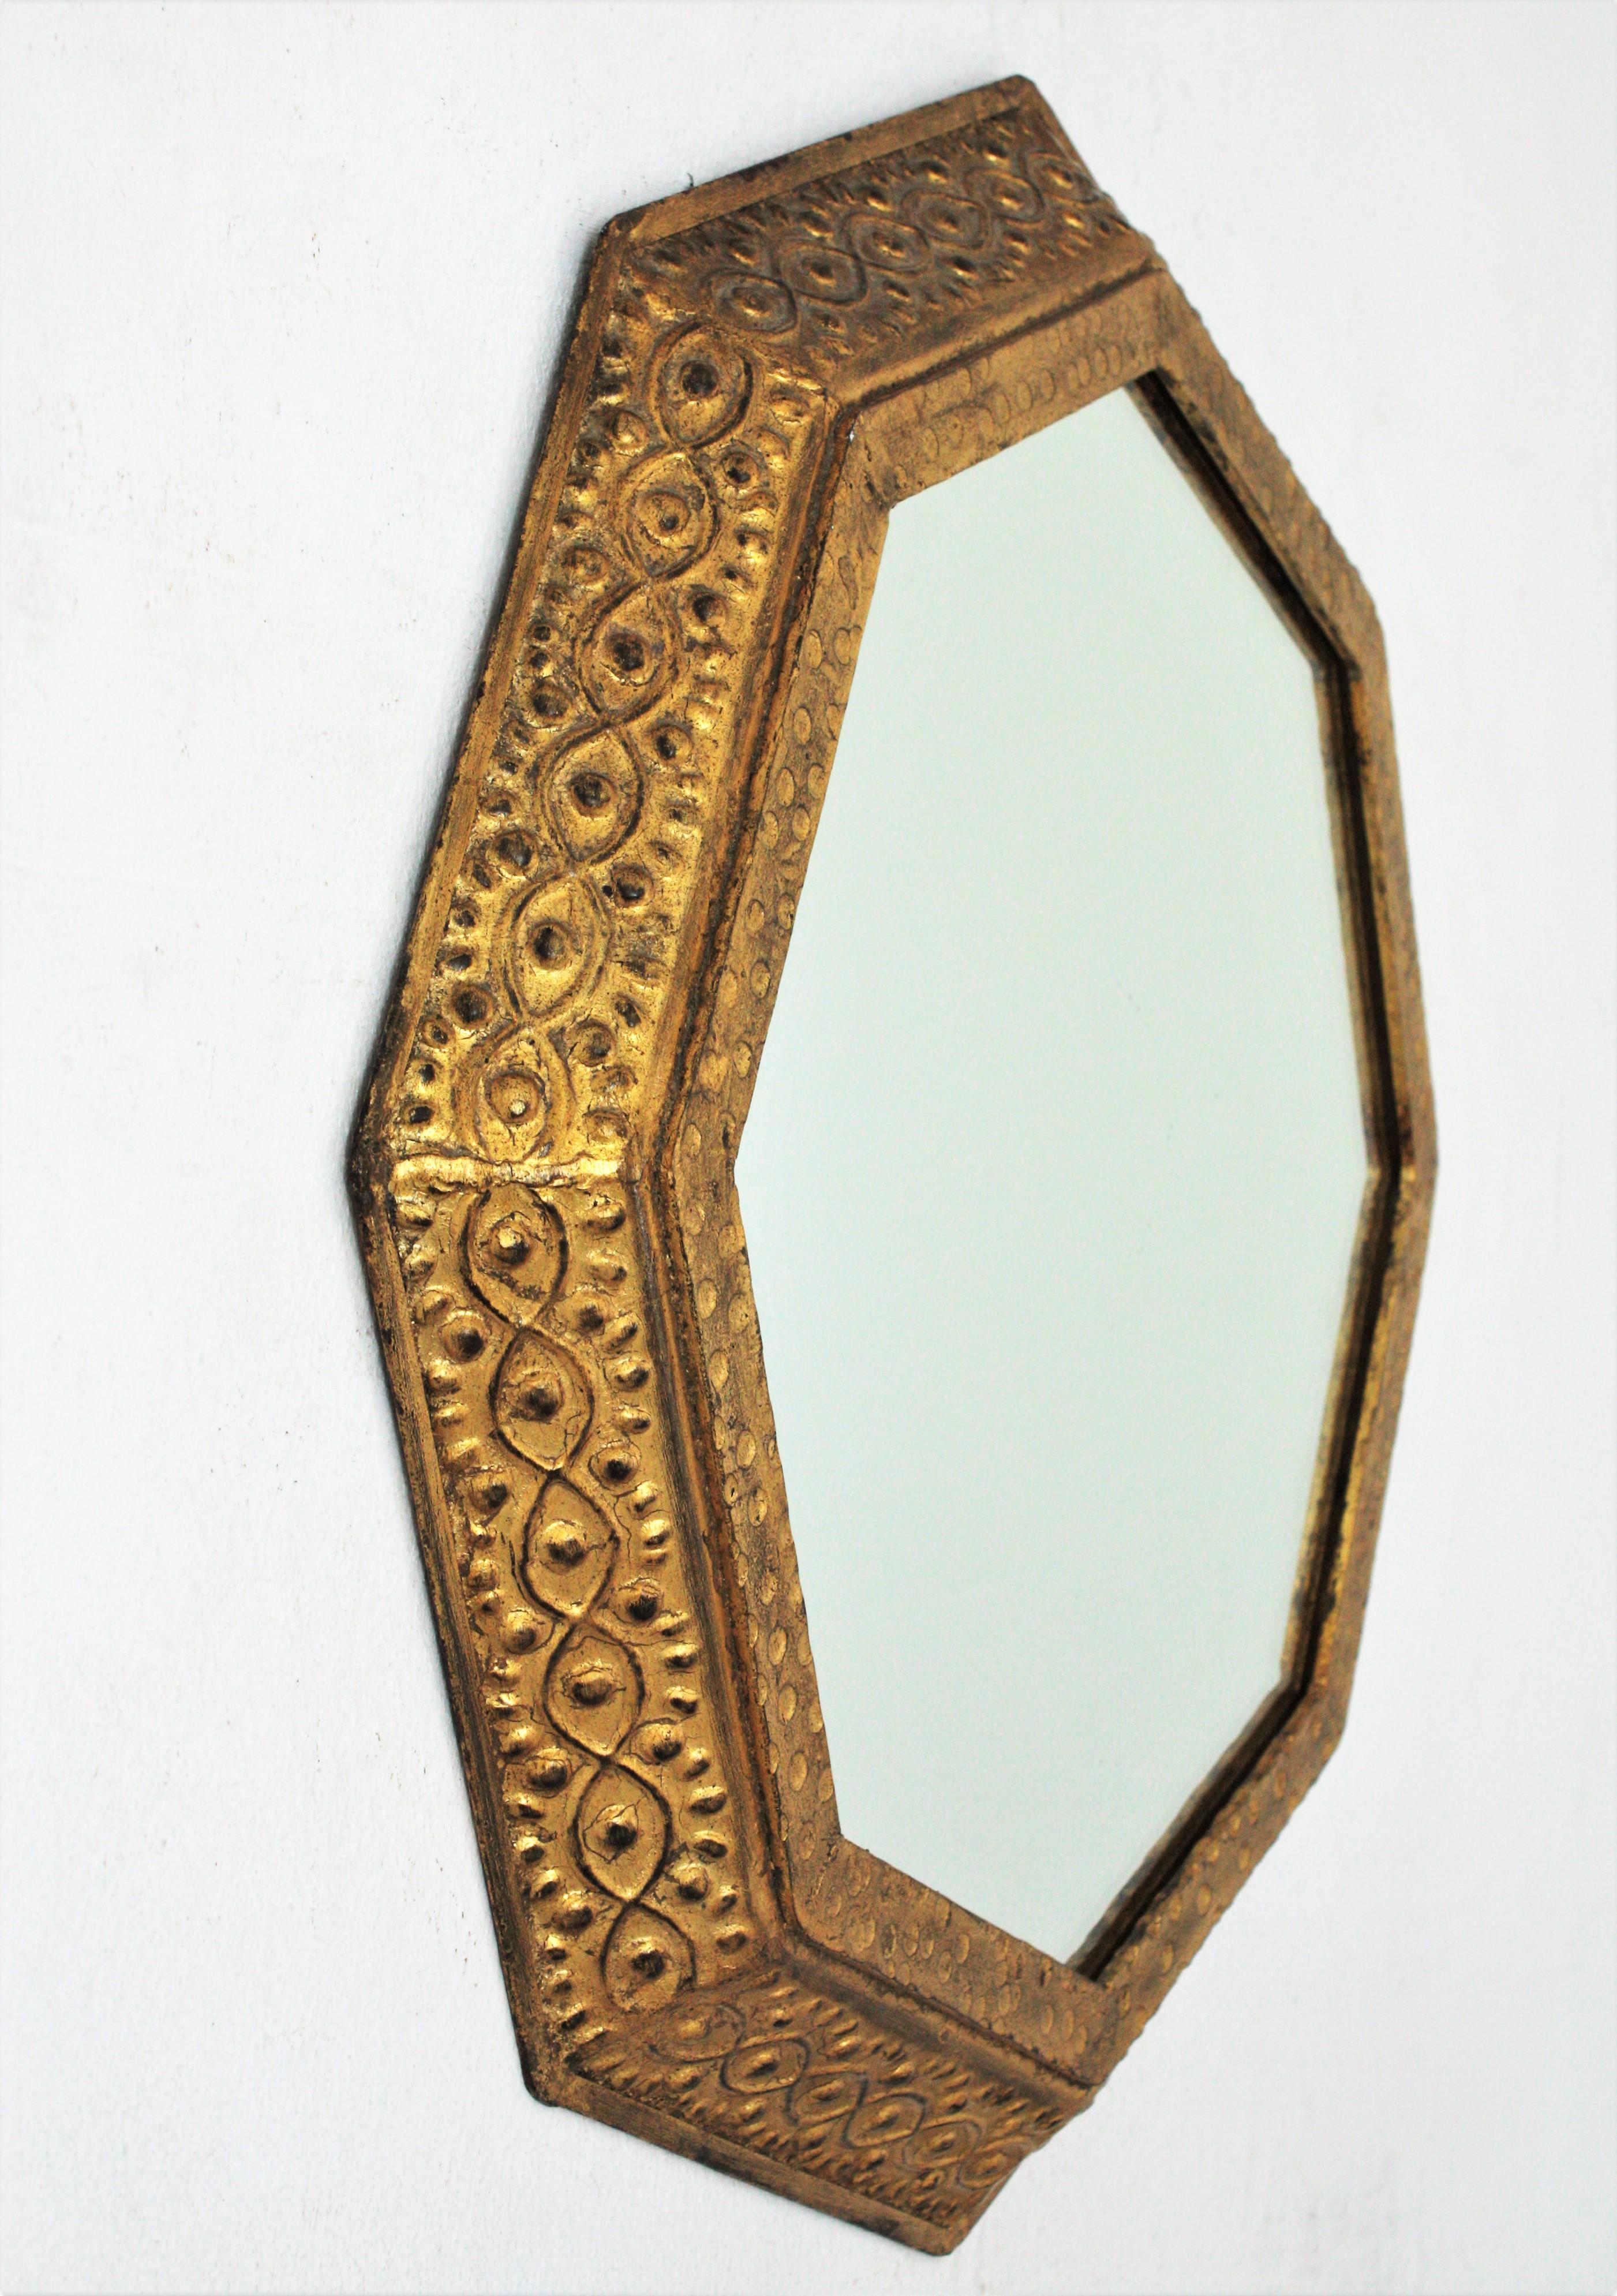 Spanish Octagonal Mirror in Repousse Gilt Iron by Ferro Art, 1950s For Sale 2